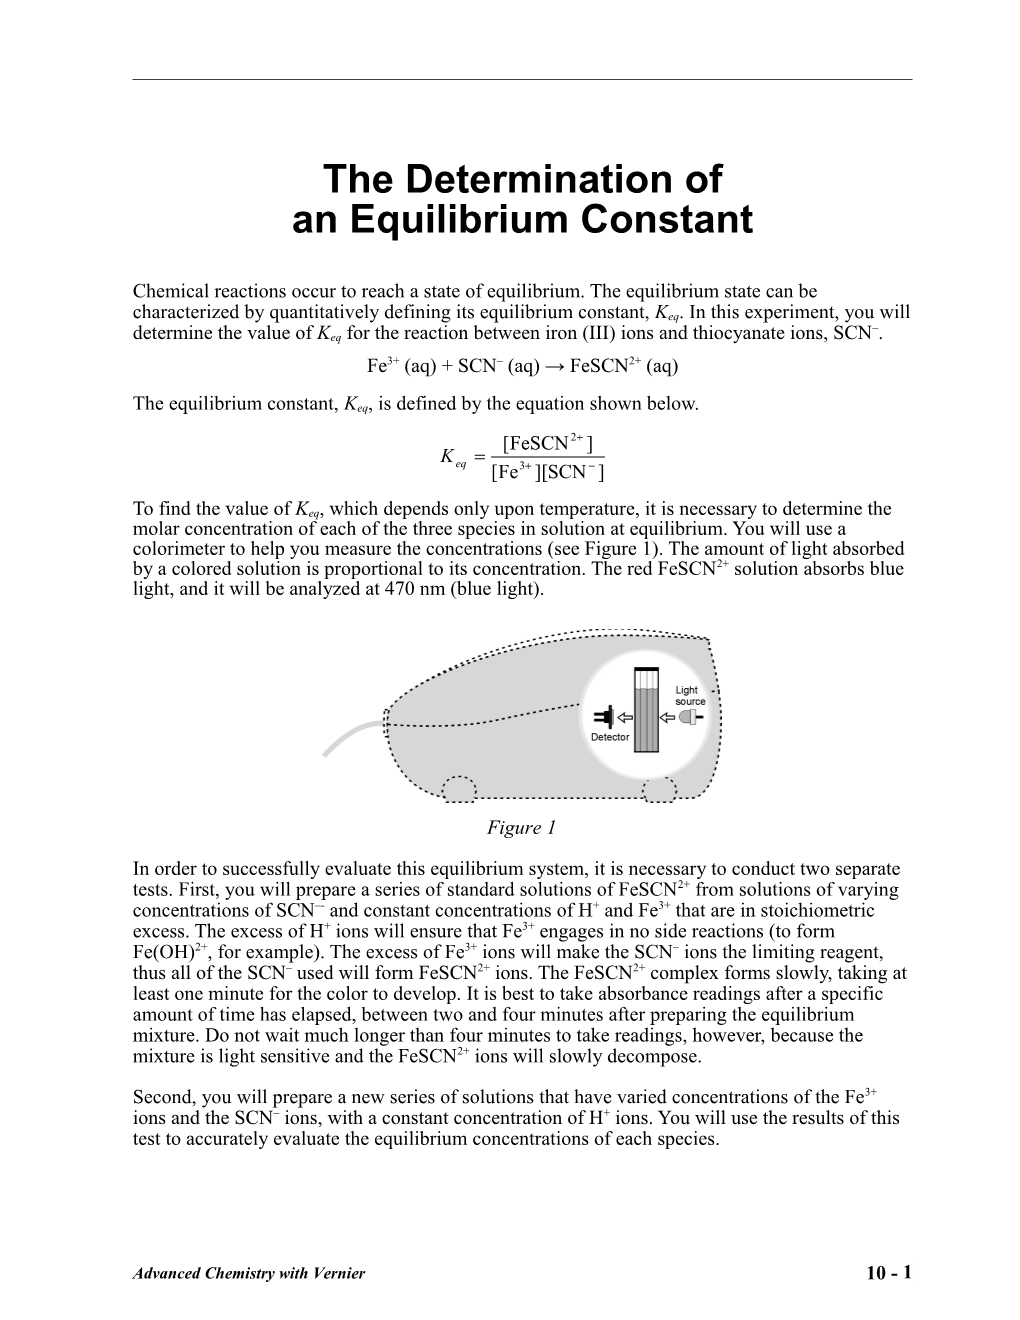 The Determination of an Equilibrium Constant